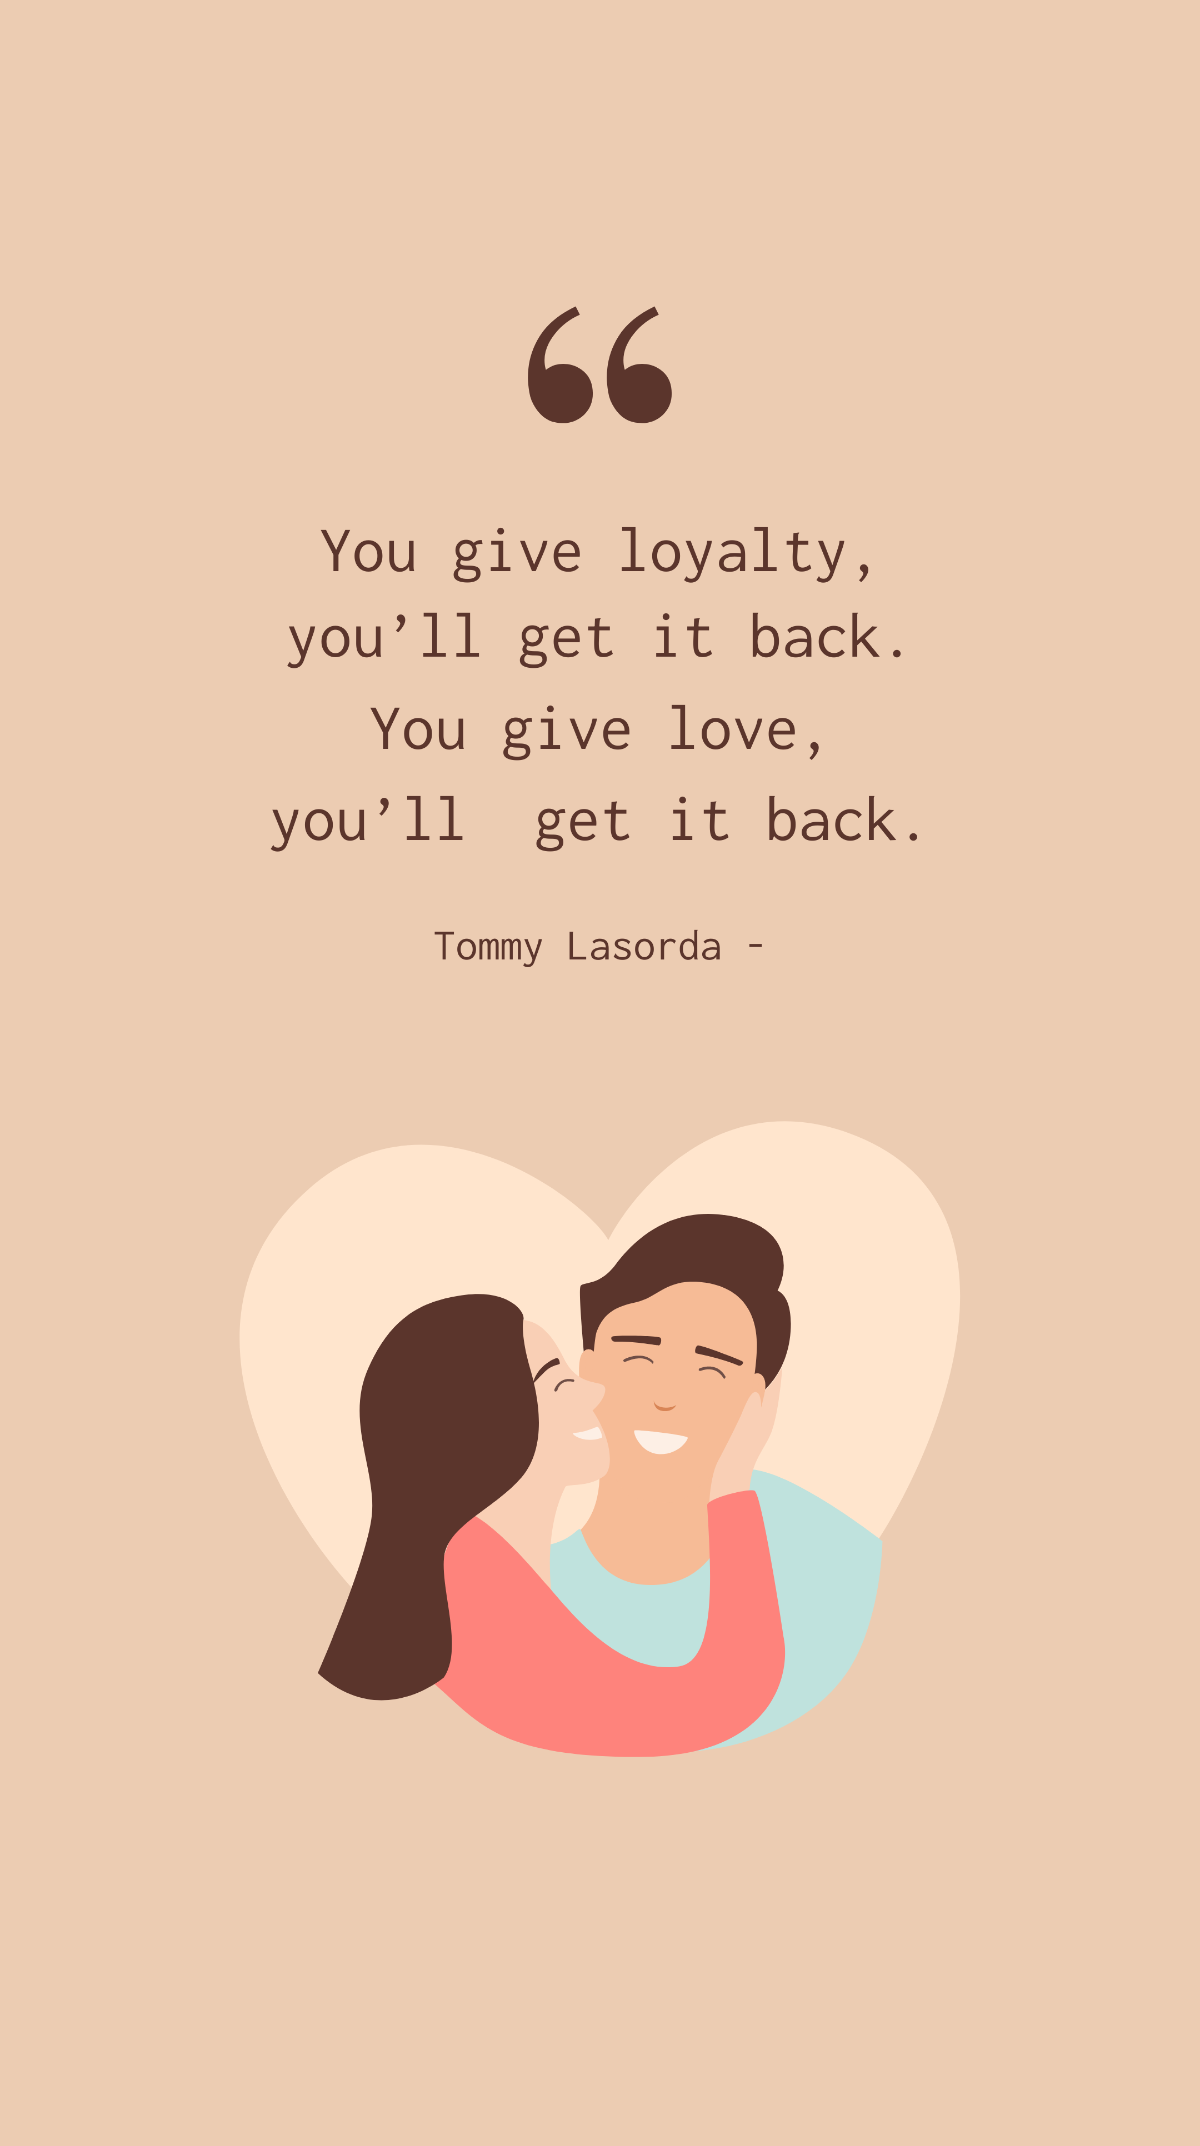 Tommy Lasorda - You give loyalty, you’ll get it back. You give love, you’ll  get it back.